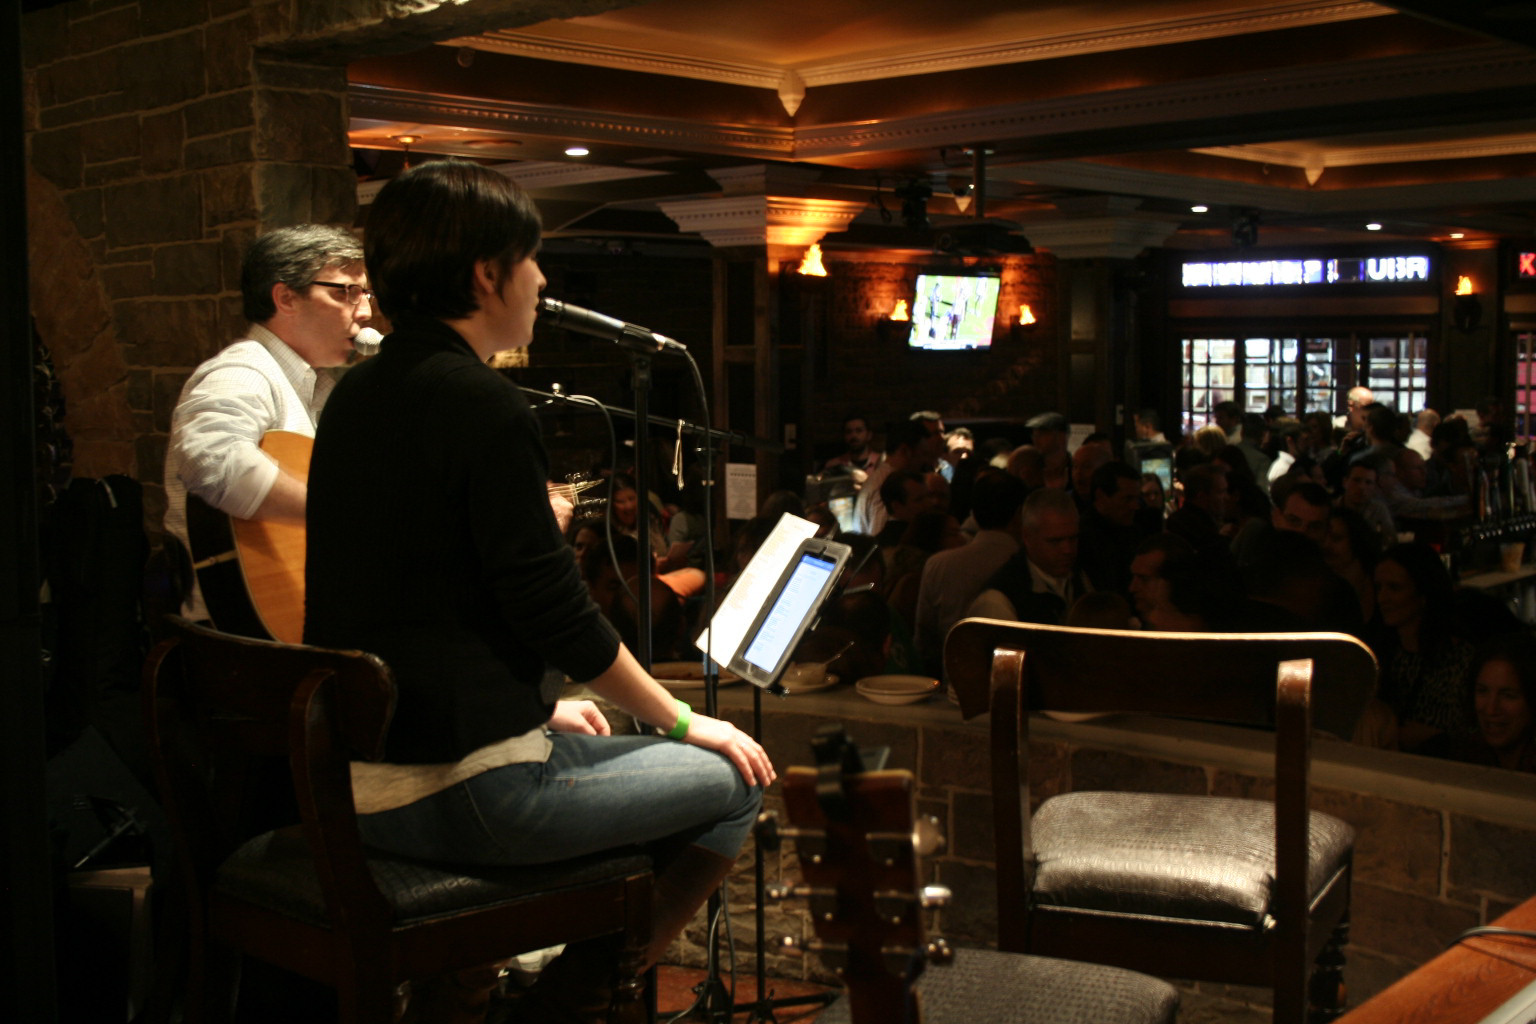 Matt Barthel and Tricia Seifert performed song covers for the packed bar.